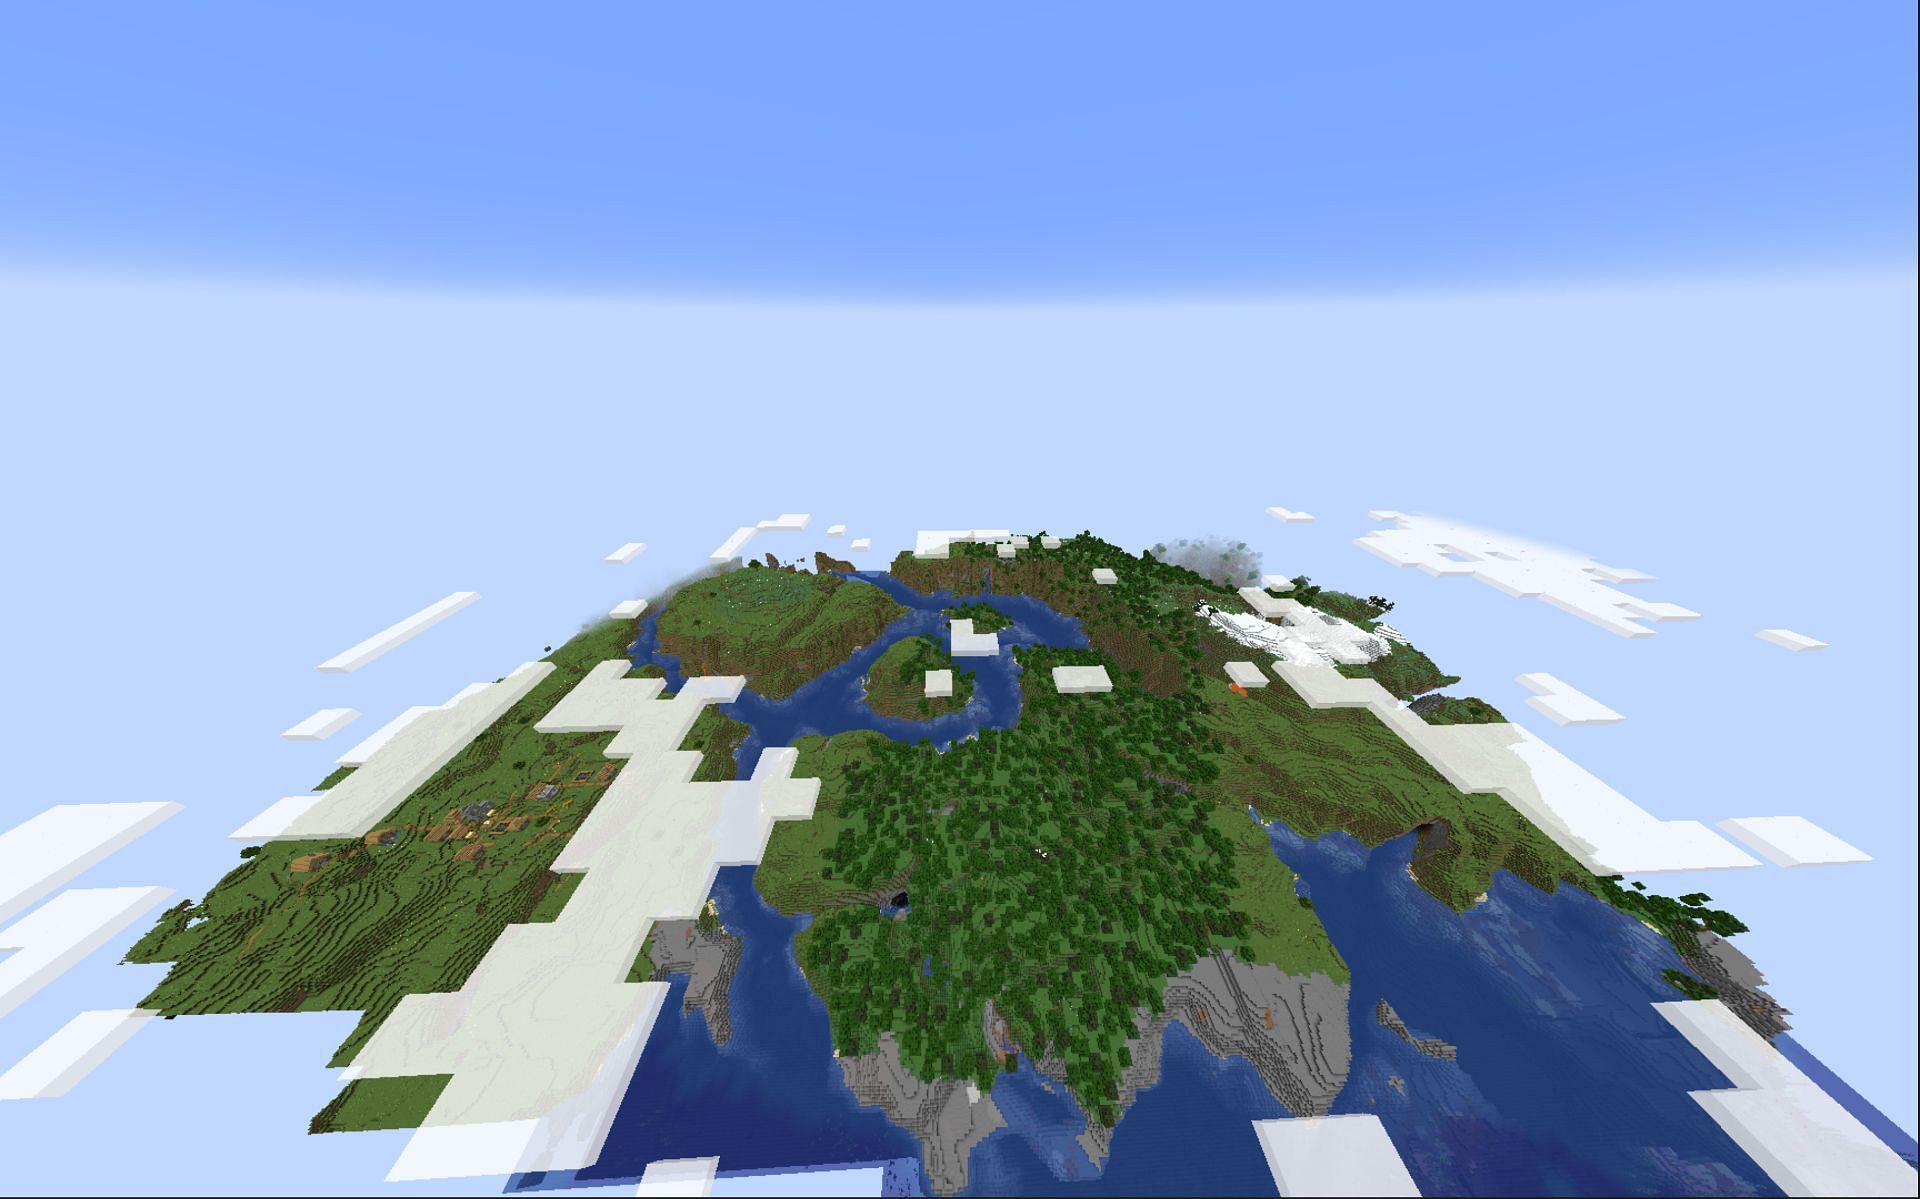 The view from Y level 320 (Image via Minecraft)